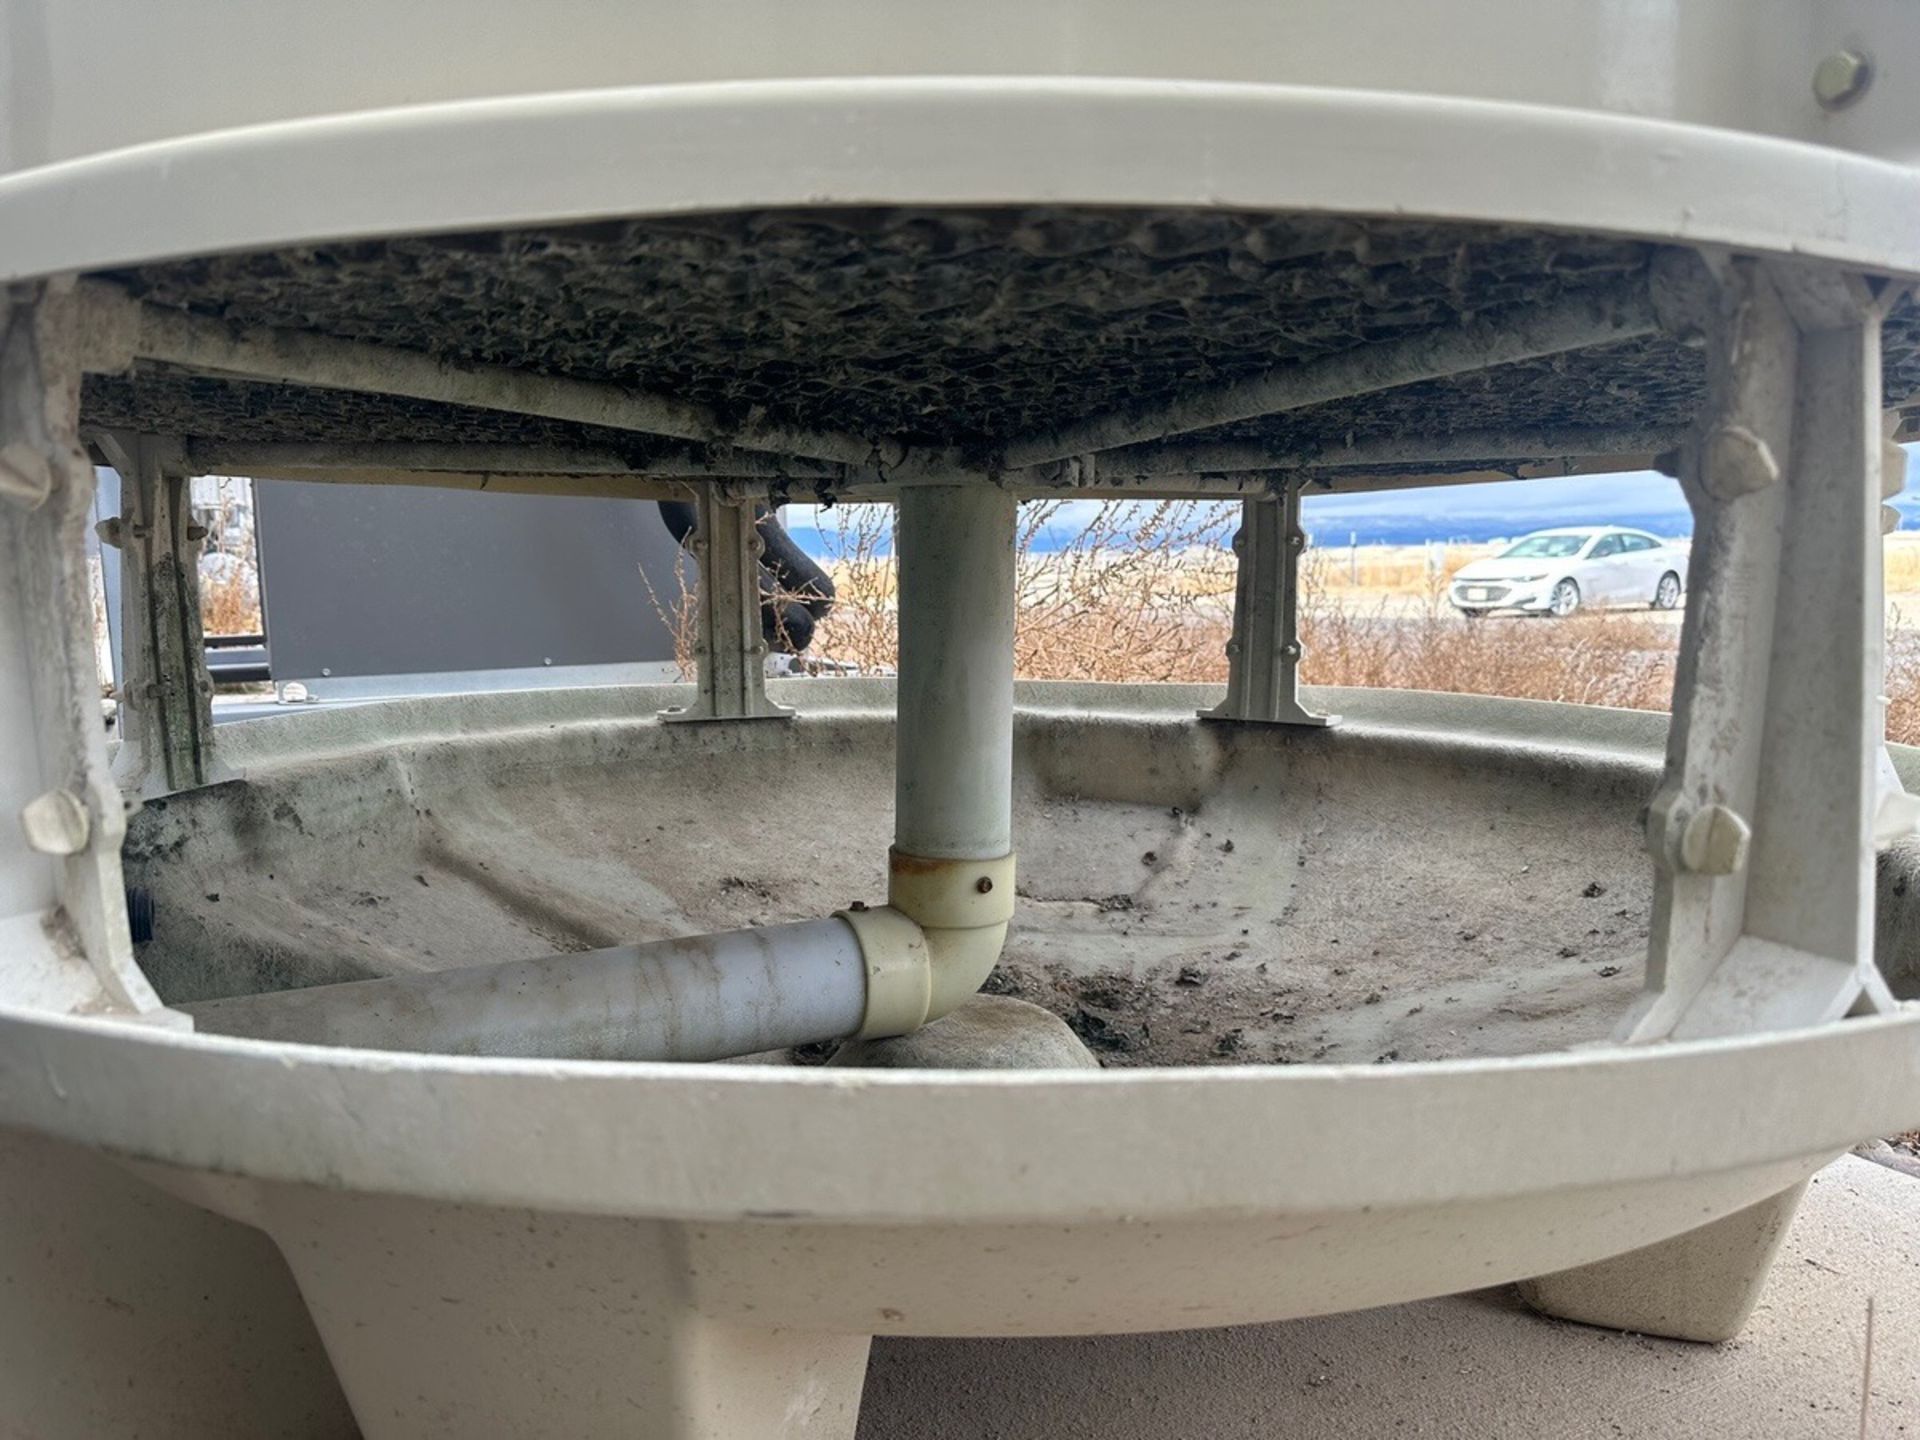 Mini Cooling Tower for Fluid Circulating Water System | Rig Fee $175 - Image 3 of 4